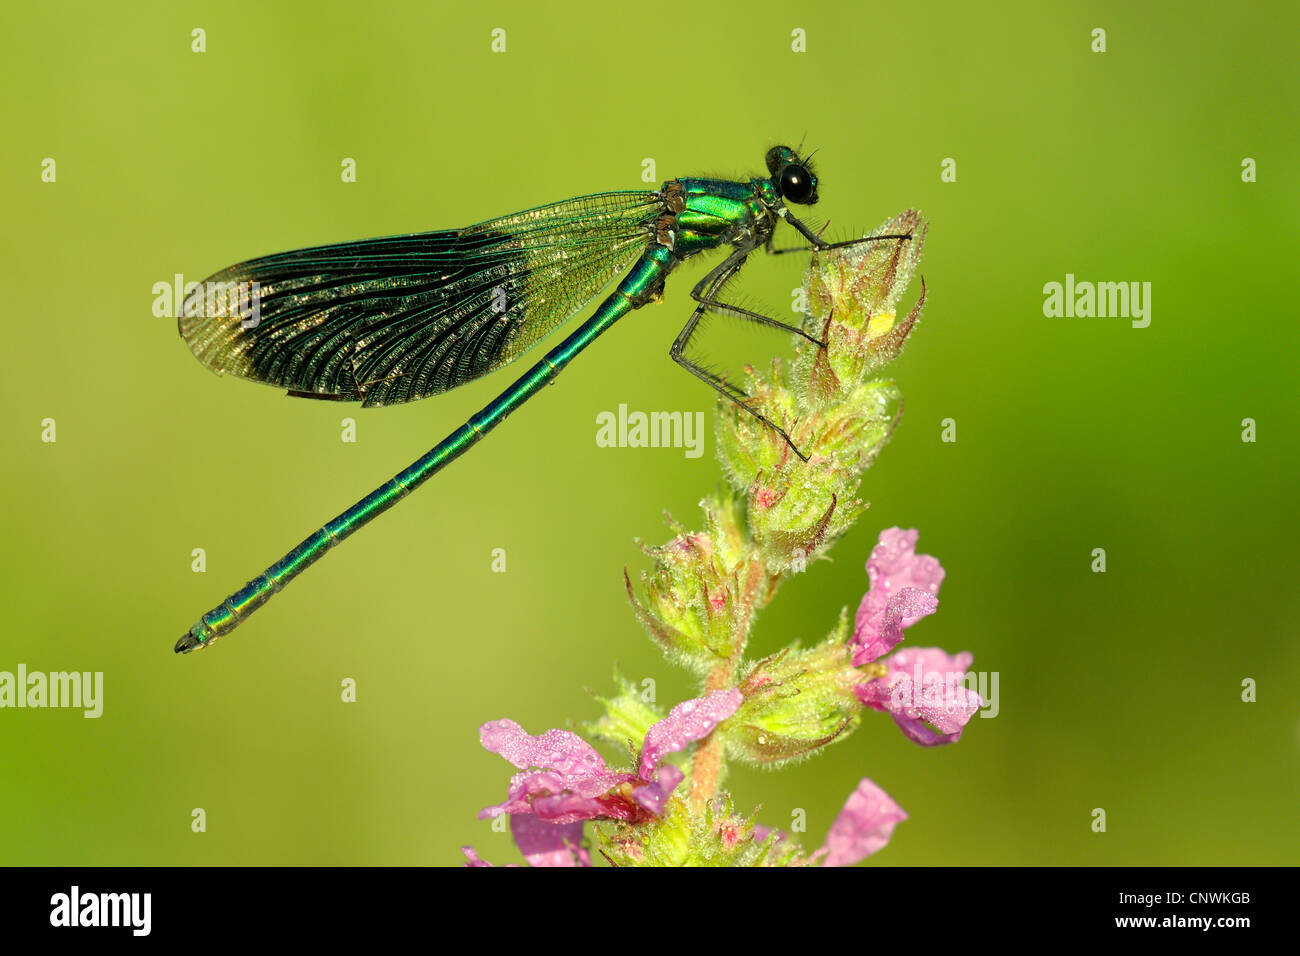 banded blackwings, banded agrion, banded demoiselle (Calopteryx splendens, Agrion splendens), male covered with drops of morning dew sitting on purple loosestrife, Germany, North Rhine-Westphalia Stock Photo